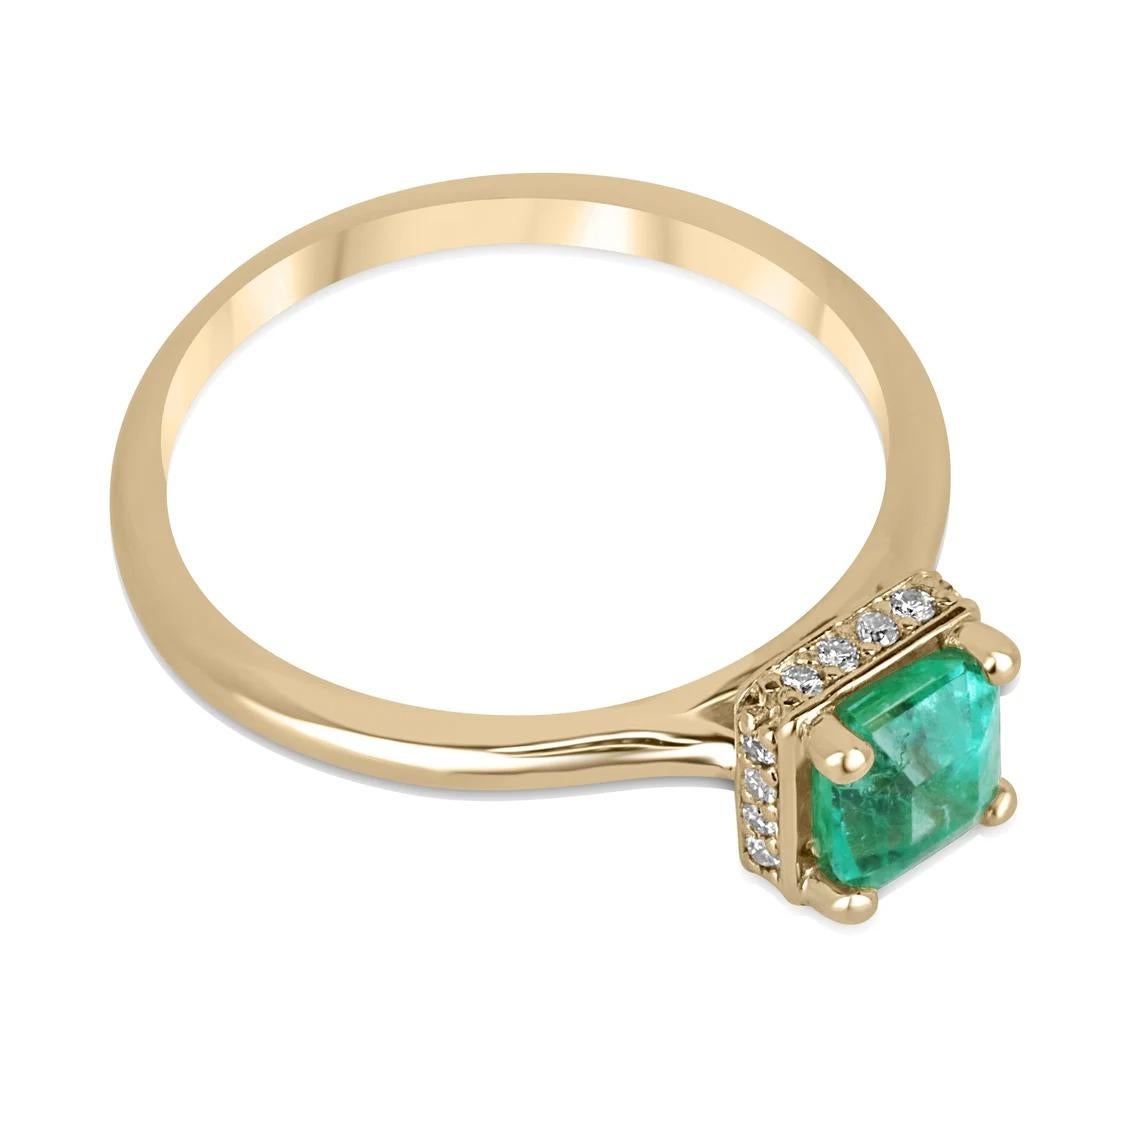 This stunning emerald and diamond ring features a gorgeous 0.80-carat asscher cut emerald sourced from Zambia. The emerald is set in a four-prong setting that showcases its unique cut and vibrant green color. The ring also boasts a hidden diamond